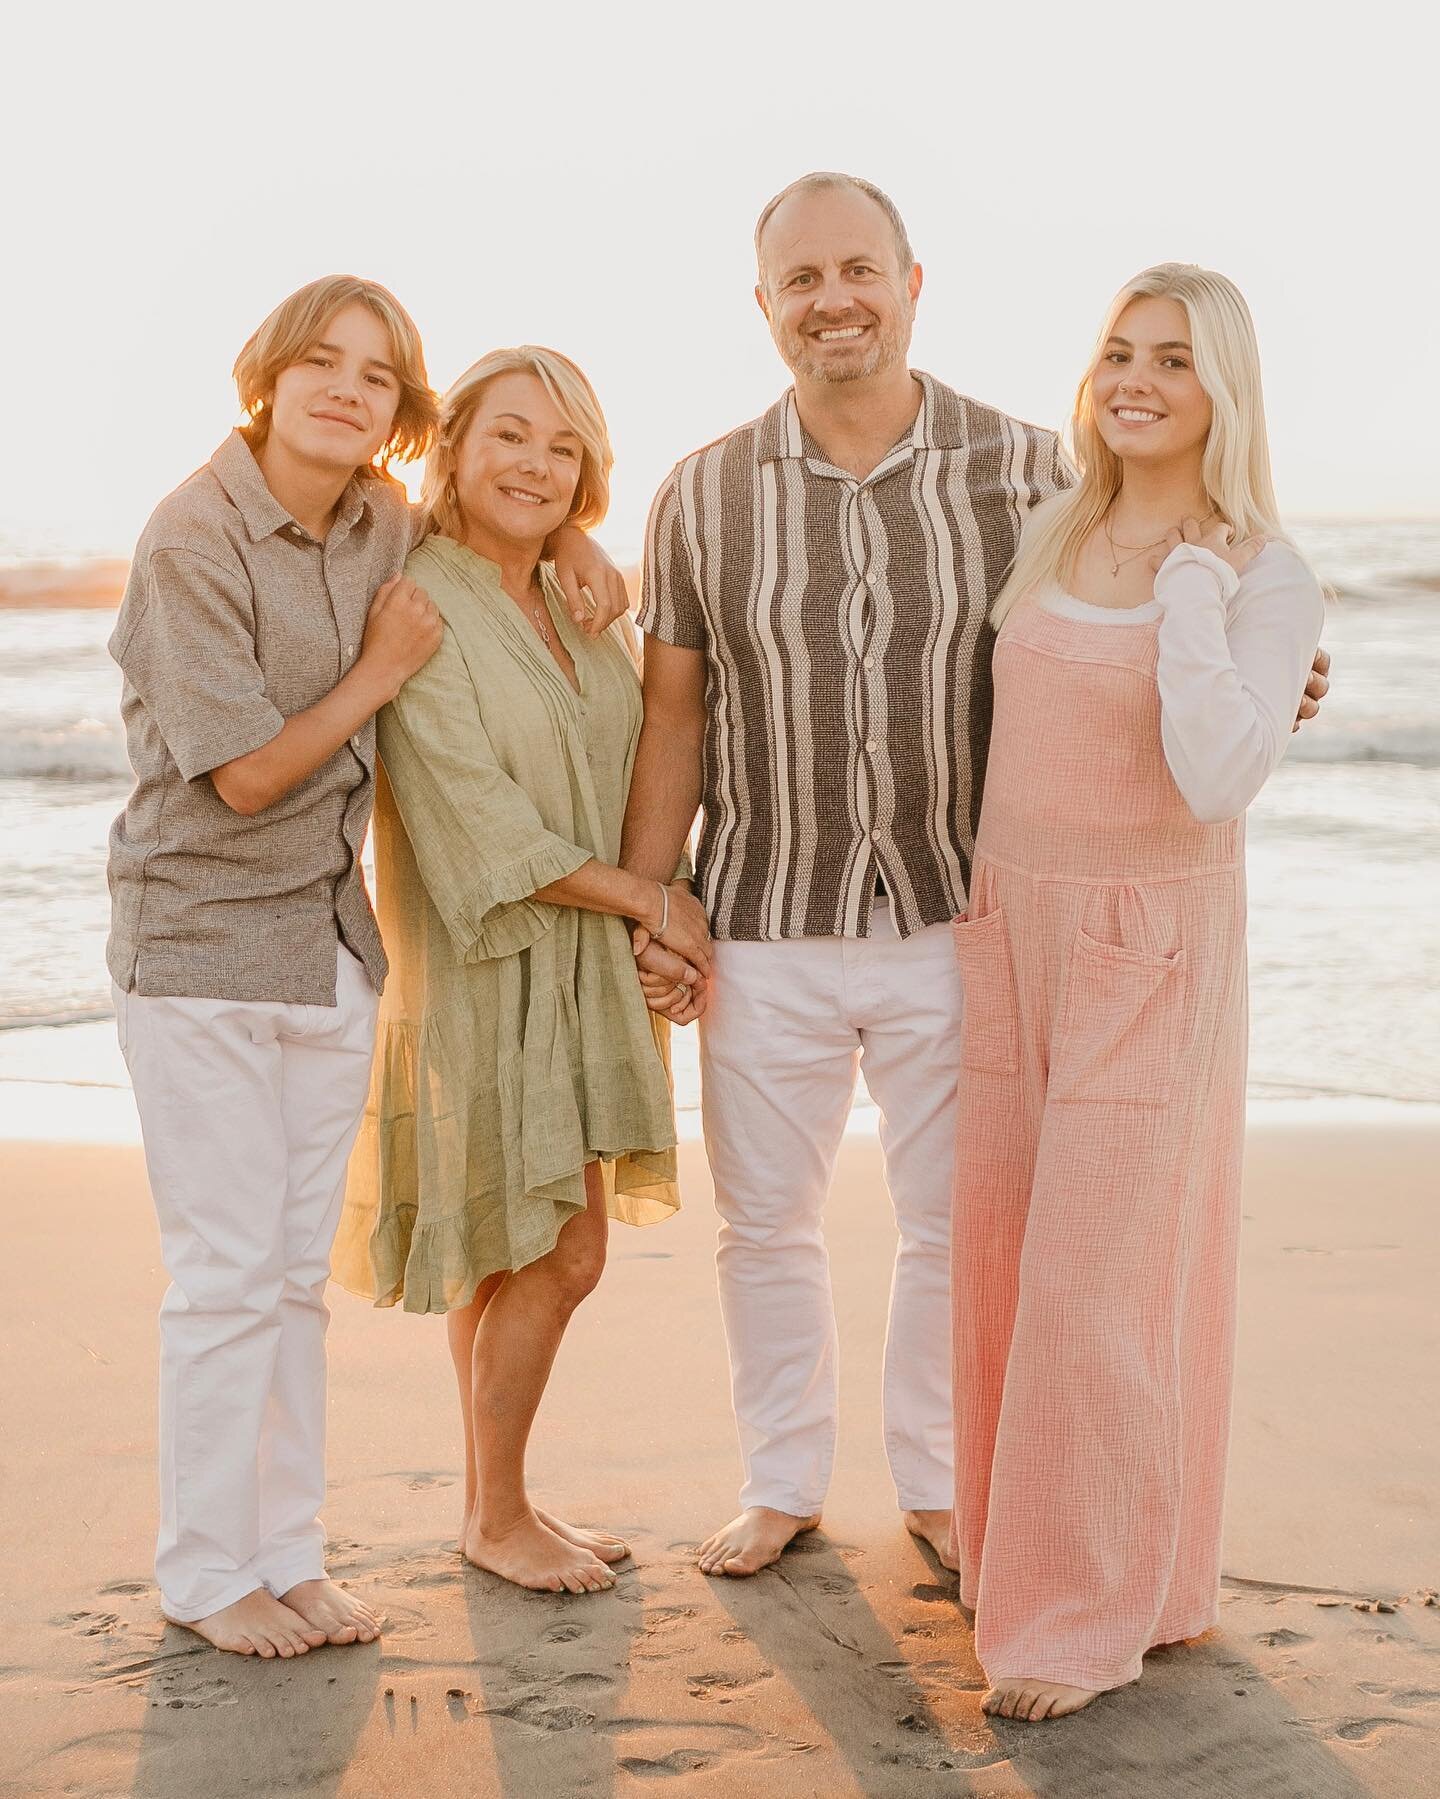 Photographed a family sunrise session this past weekend at Scripps Pier &amp; my gosh it was insanely beautiful. 
Seeing my families year after year &amp; how the kids have grown just blows my mind.
This work is such an immense honor! 
Thank you for 